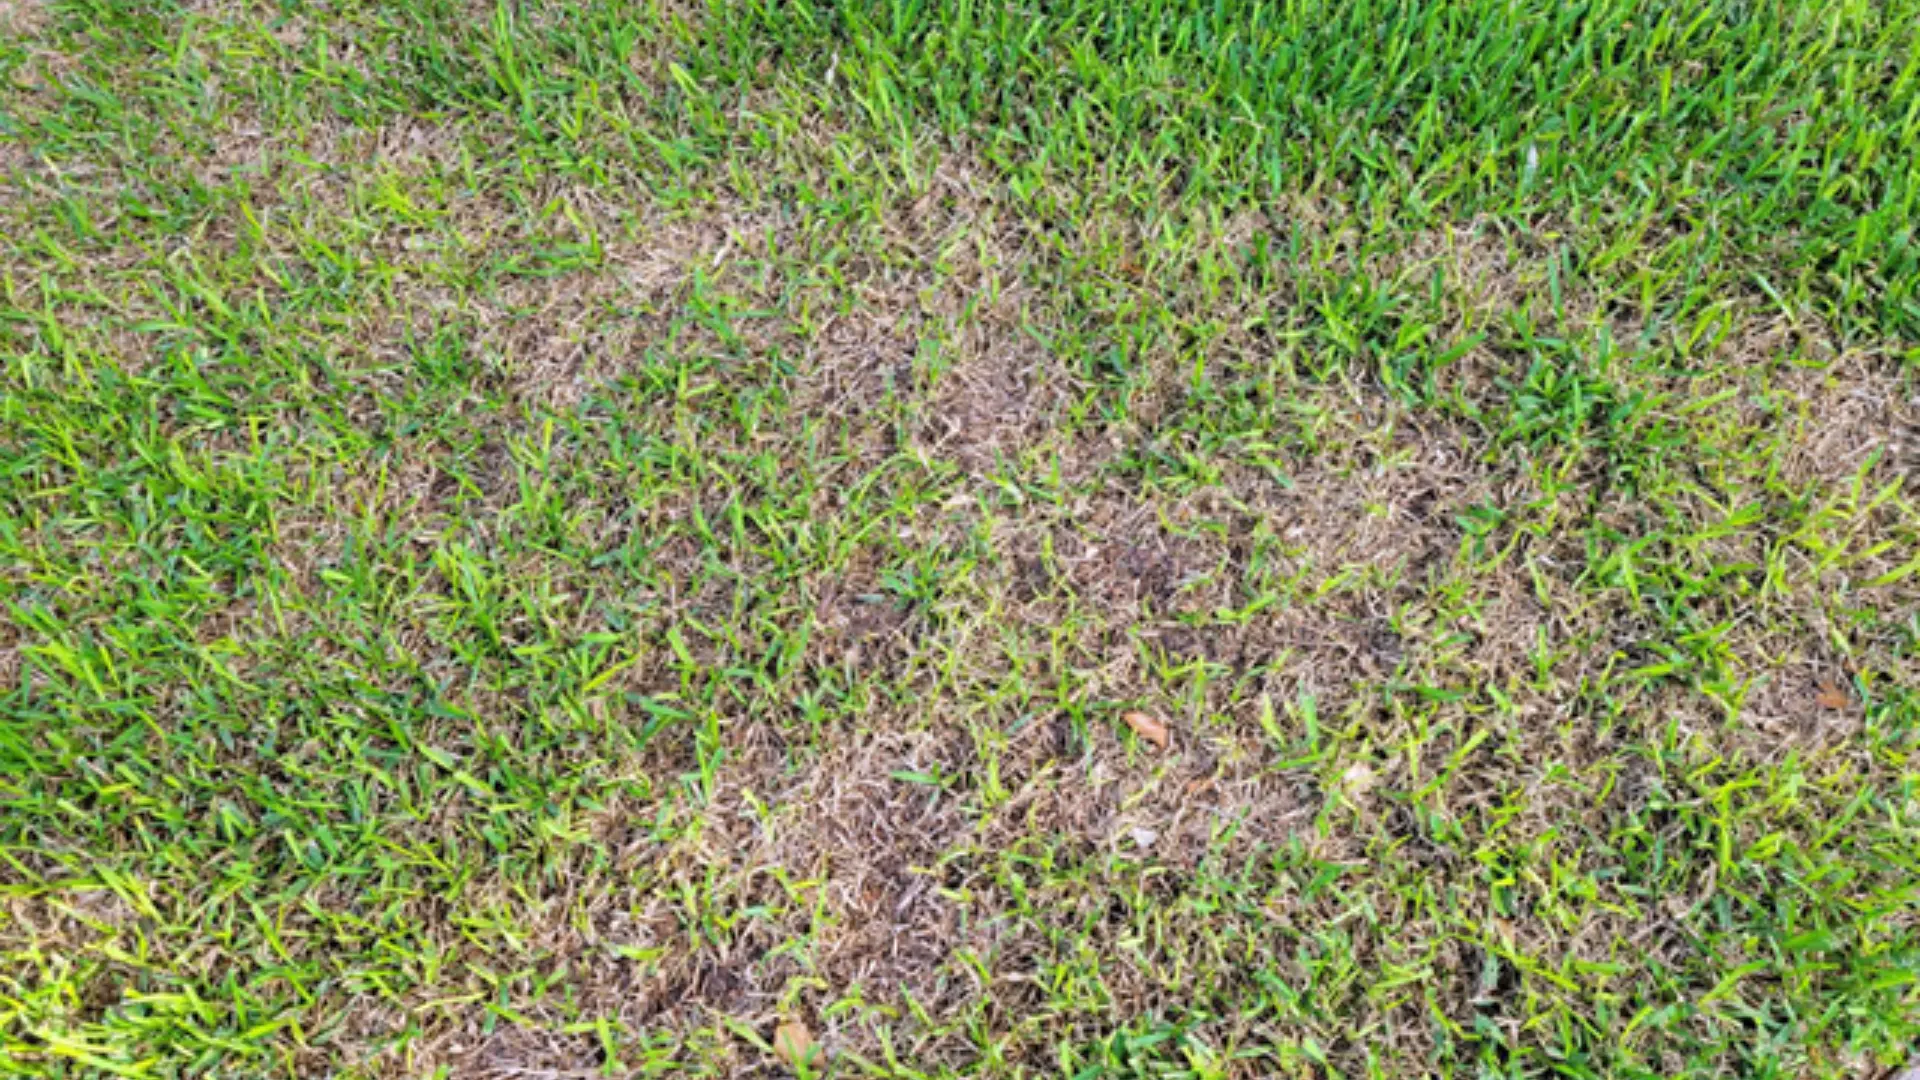 3 Fungal Diseases That Are Common on Lawns in Texas